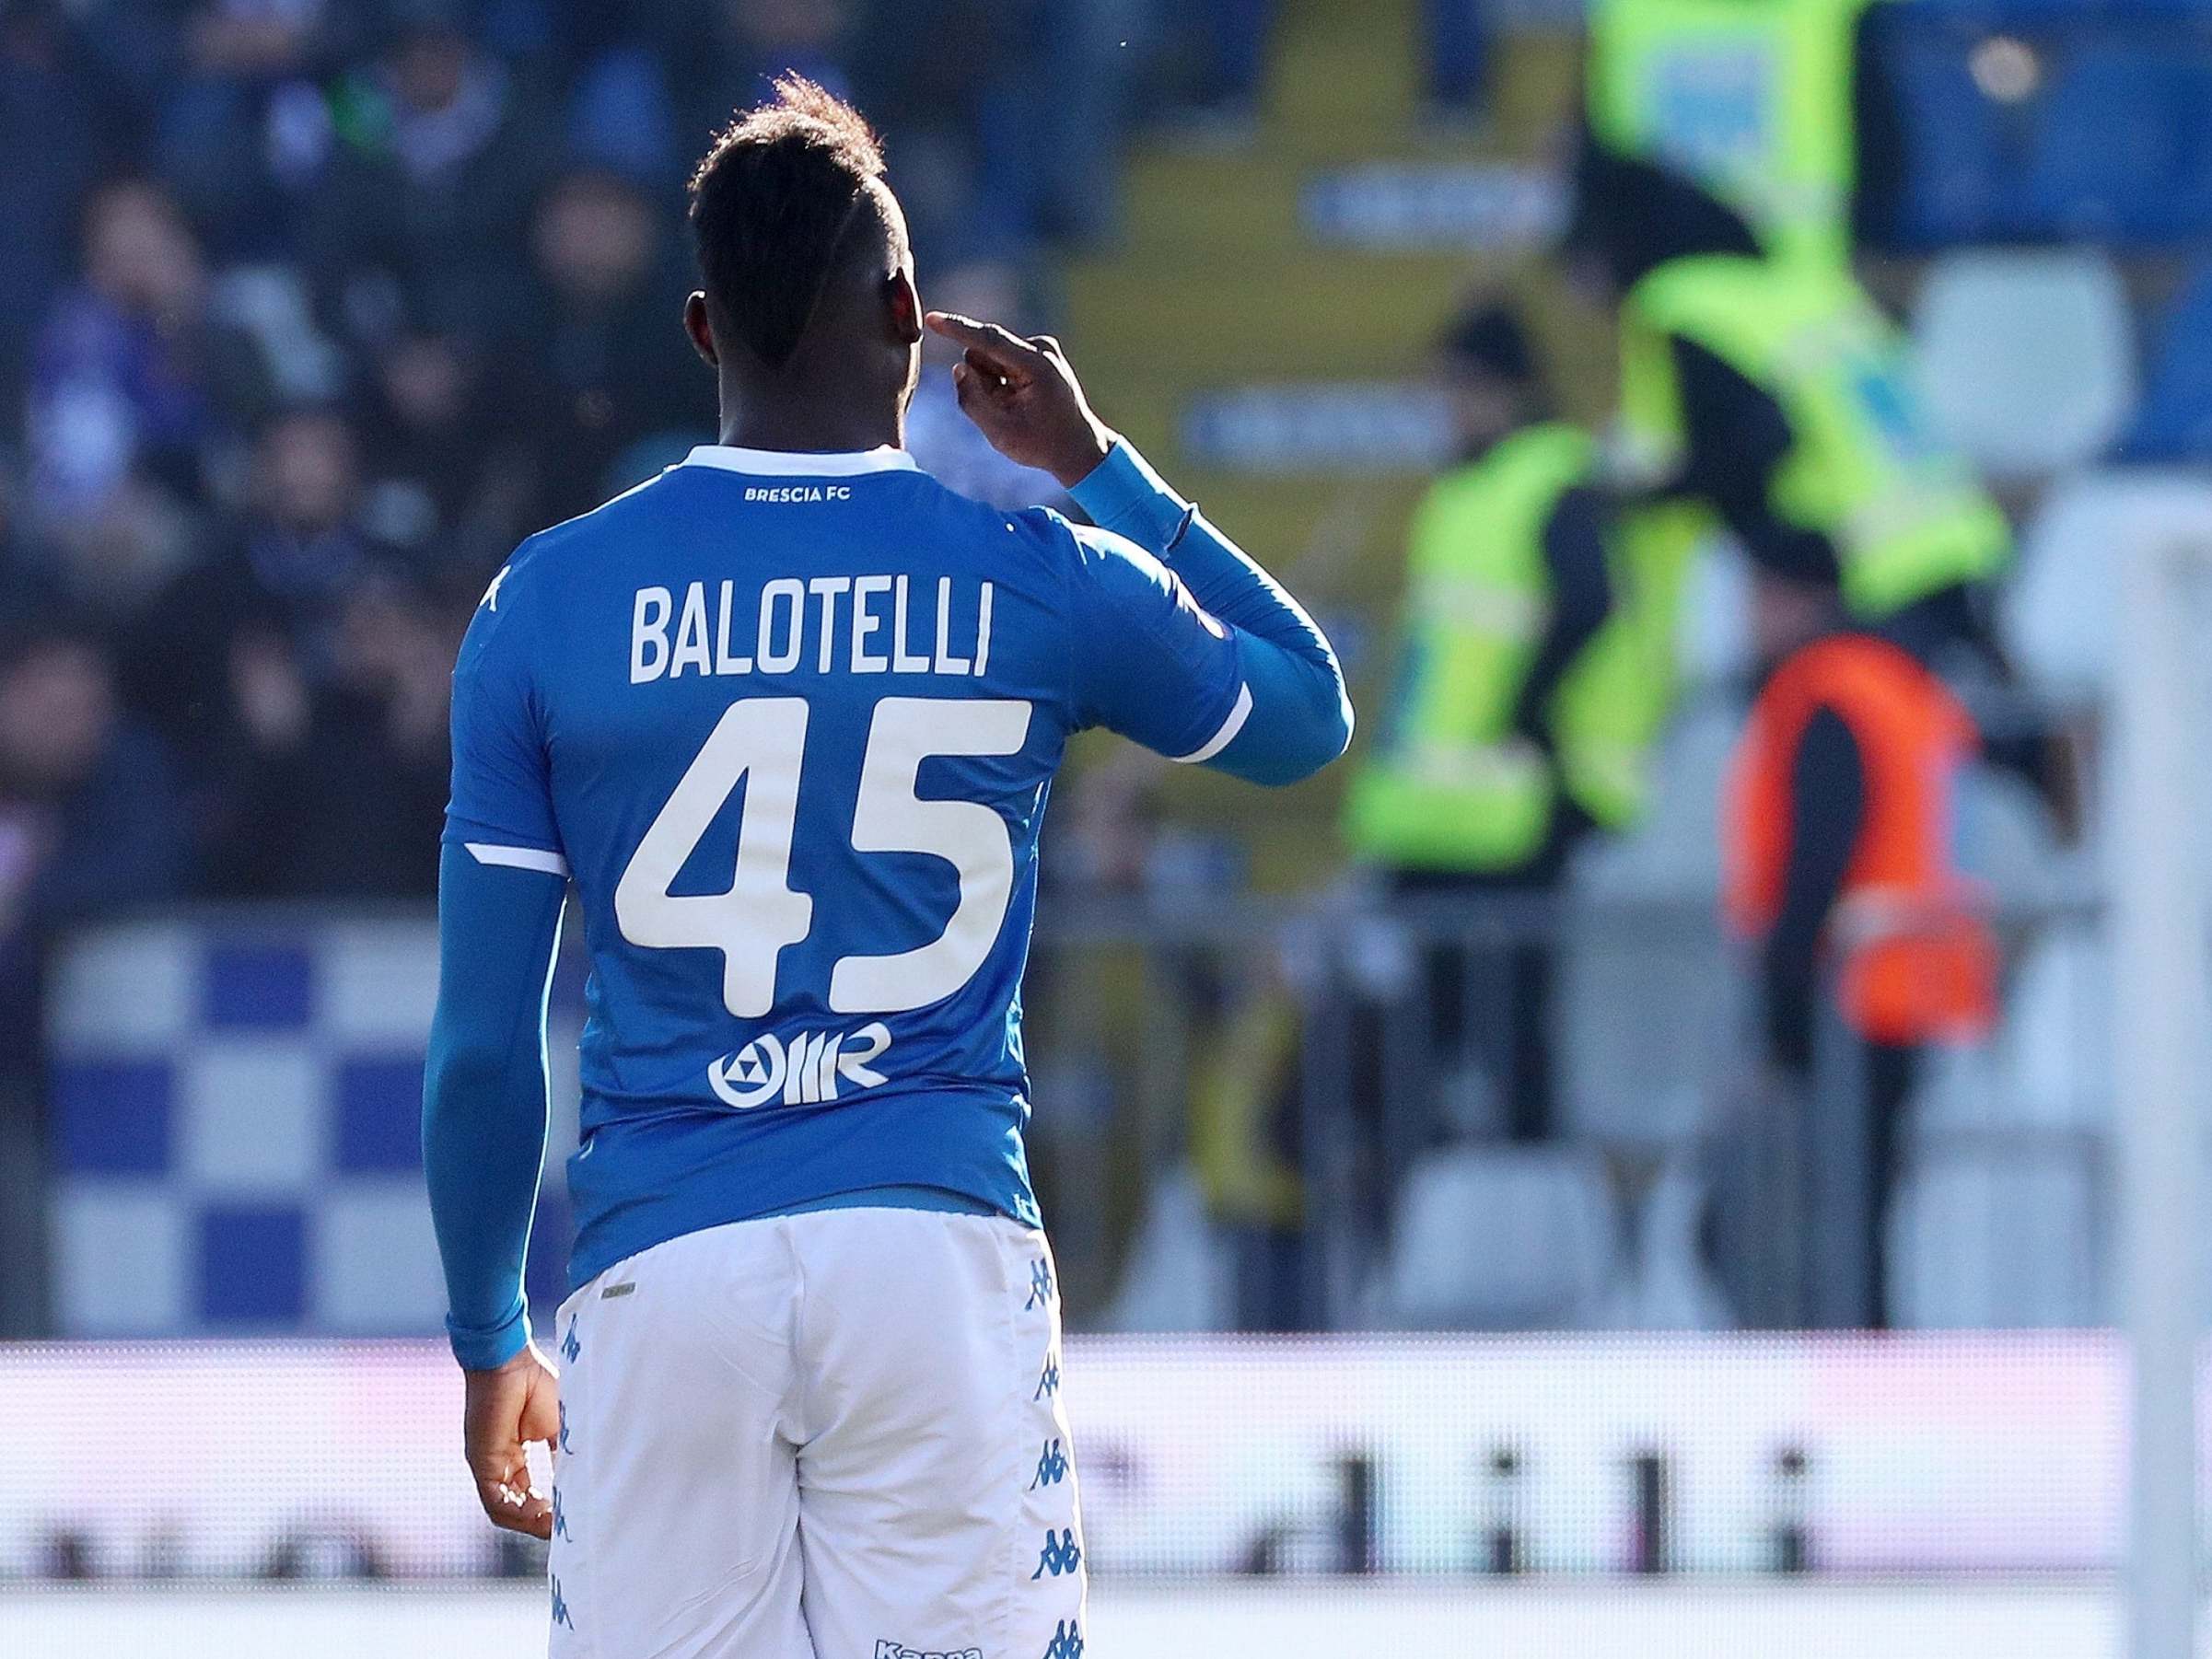 Mario Balotelli racially abused by Lazio supporters as Serie A overshadowed again